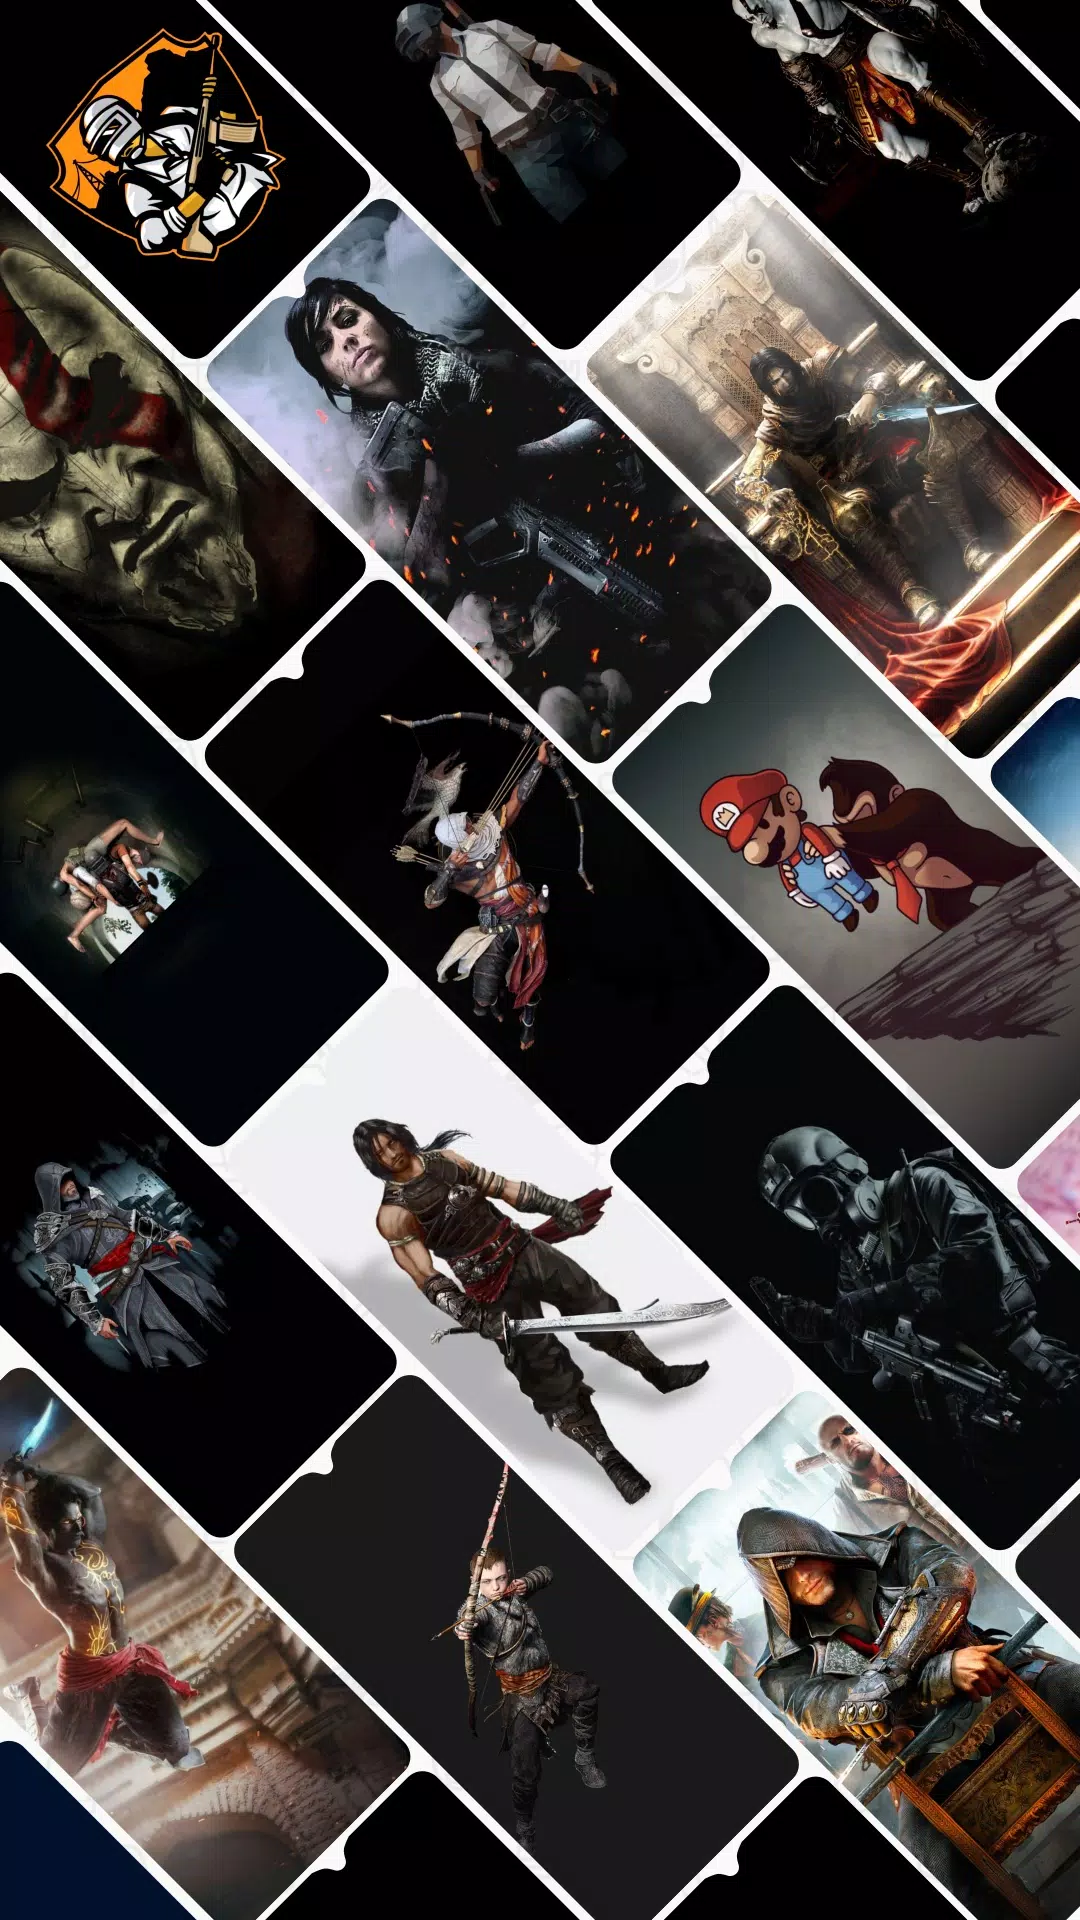 Games Wallpaper - New Gaming Wallpaper HD APK for Android Download